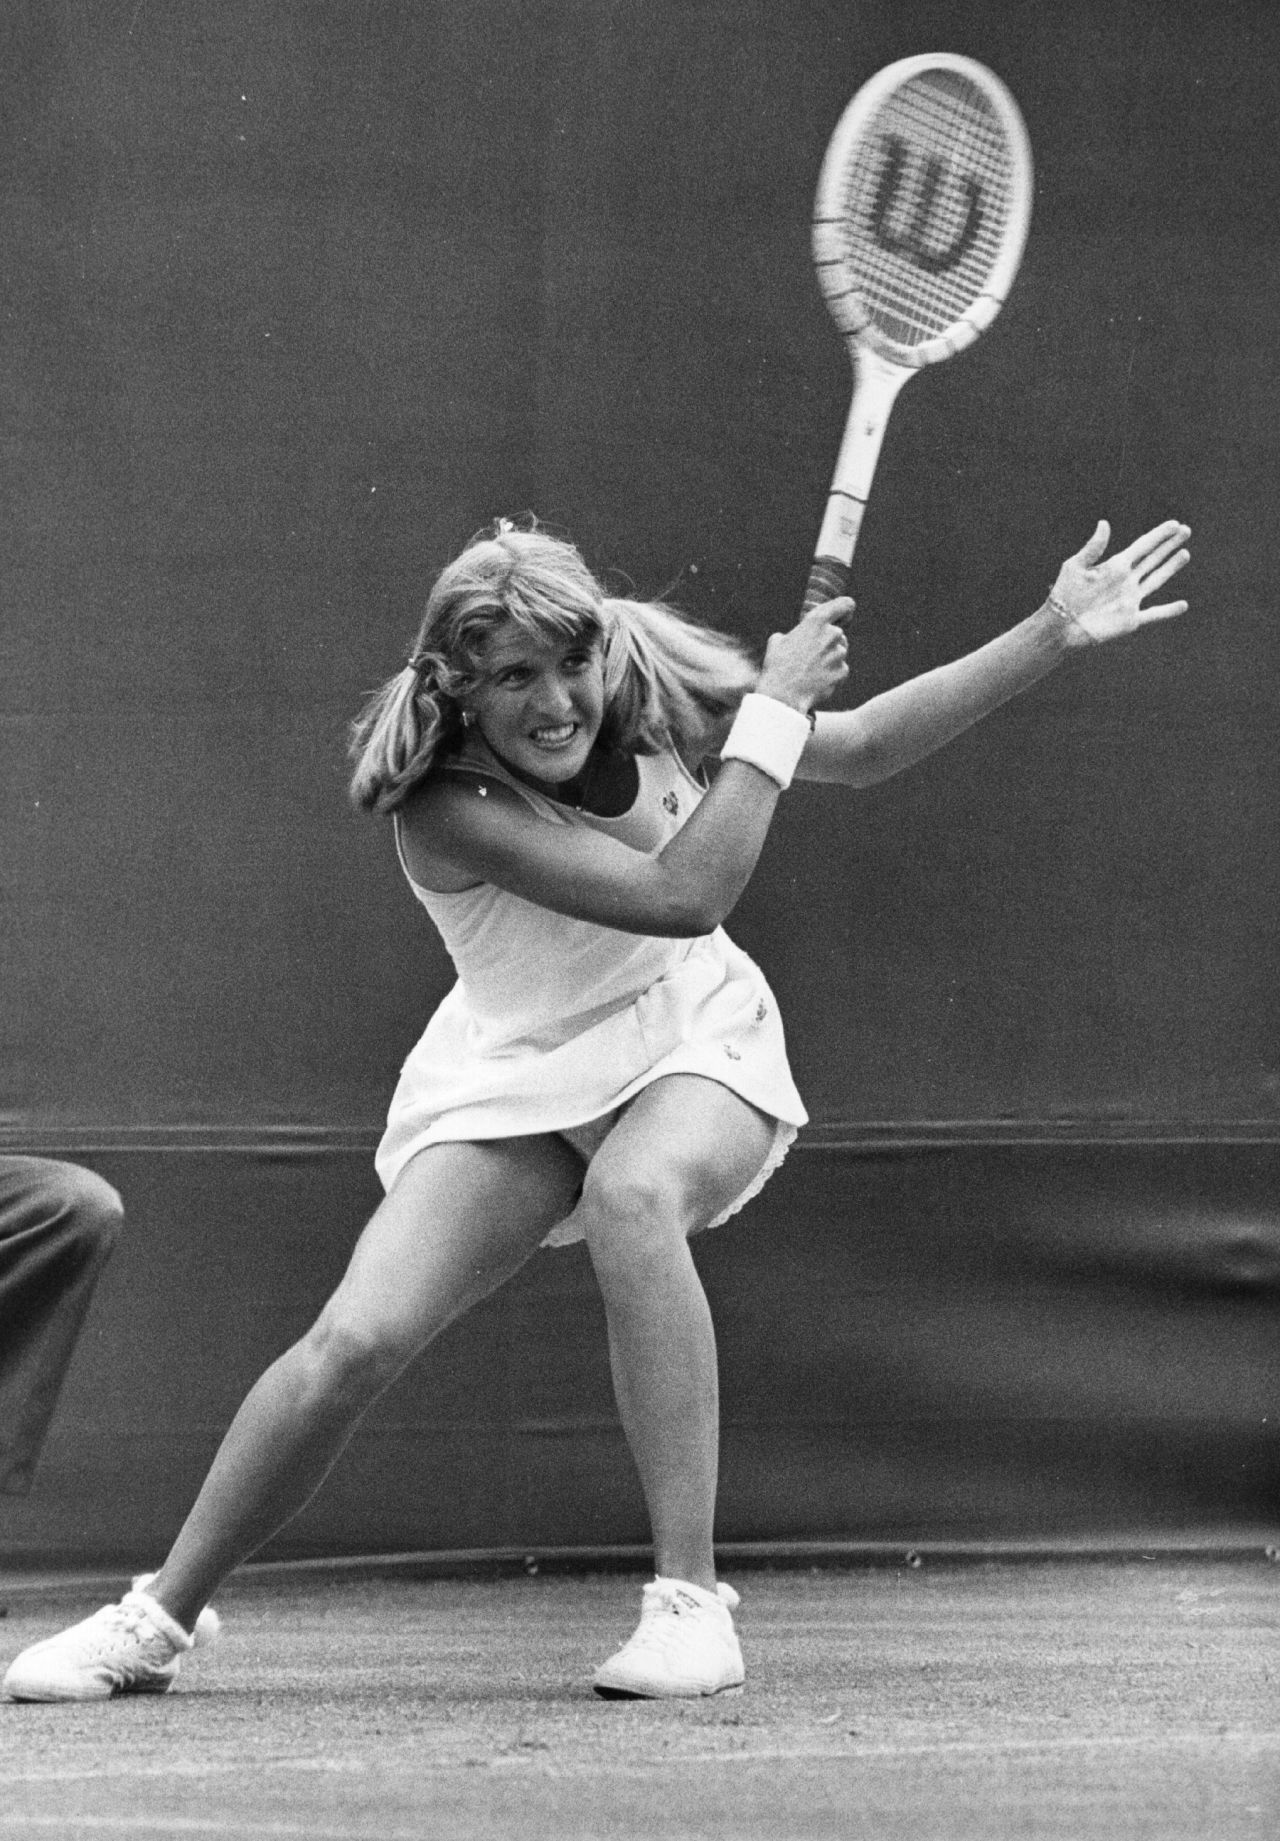 Alan Jones, a British coach who widely endorses grunting as a way to generate shot power, tells CNN that excessive grunters -- among whom he lists Sharapova and three-time grand slam winner Tracy Austin (pictured) -- aren't "co-ordinating [shot and grunt] for the right reasons ... once the ball has left, there is no sense of value."